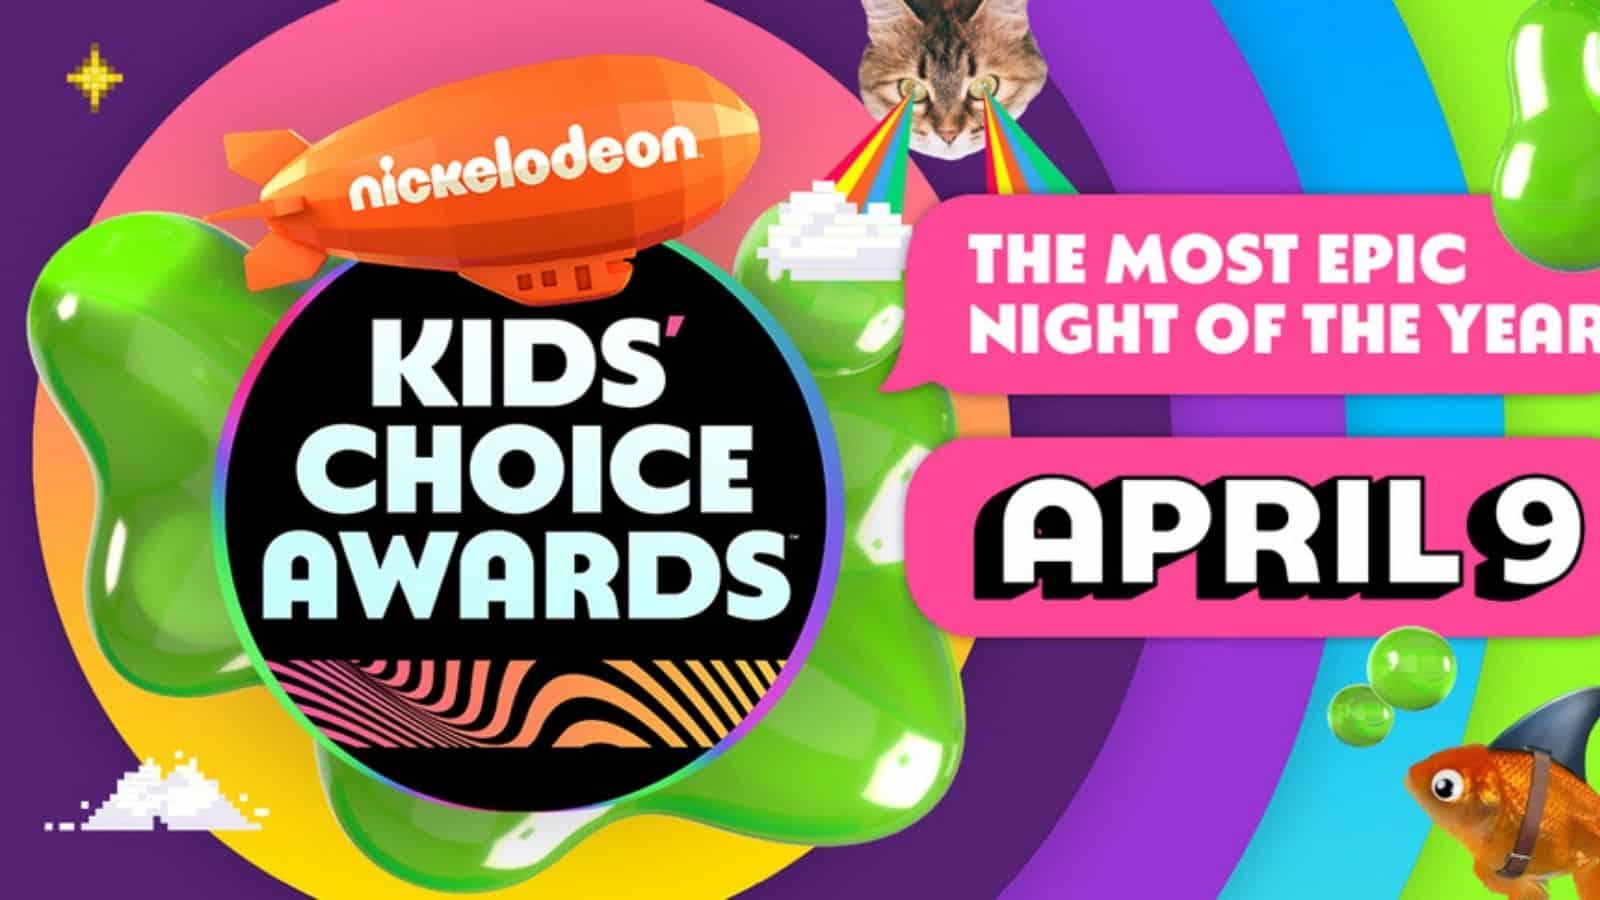 Kids CHoice awards 2022 official image